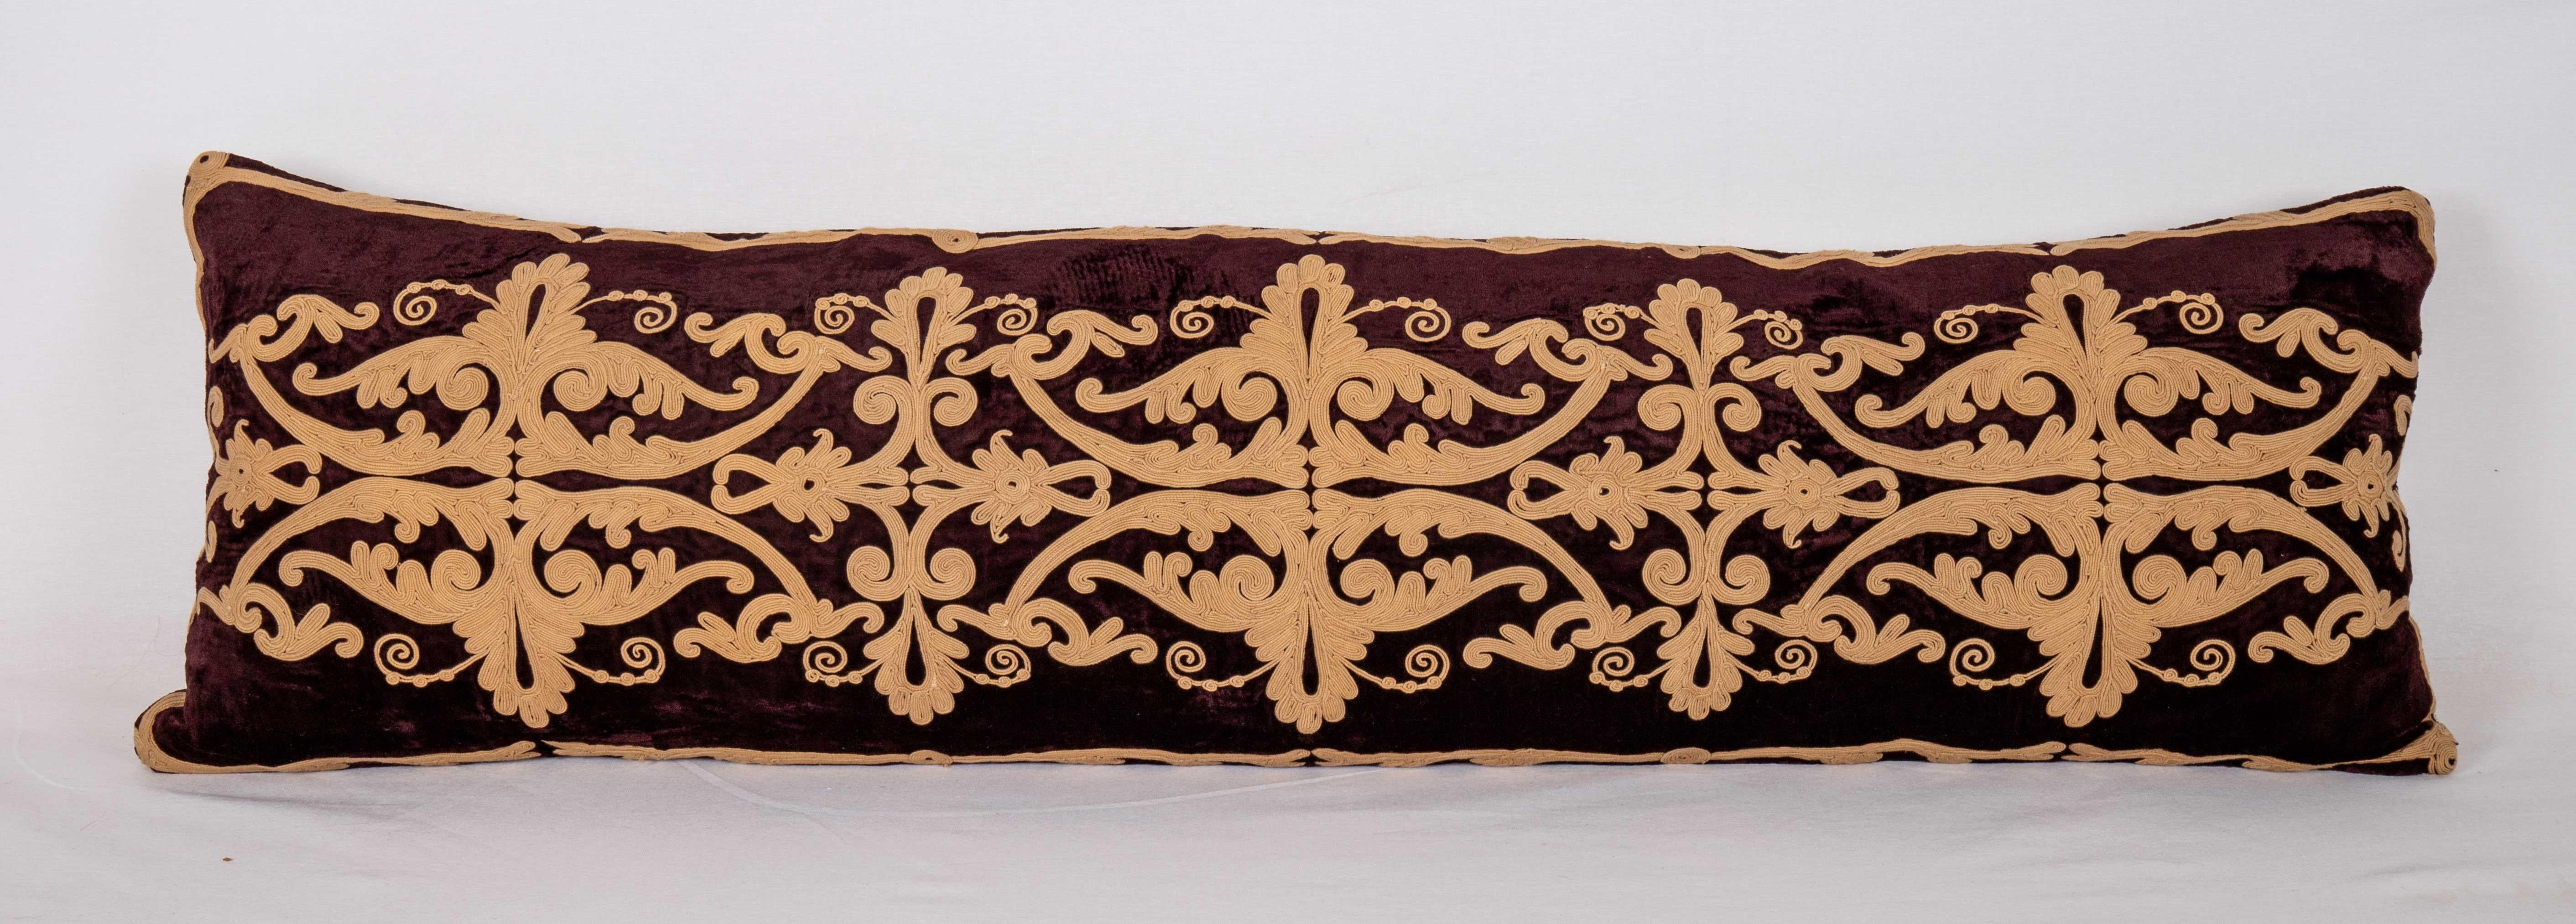 Pillow is made from a couched embroidered on velvet panel. It is probably from France dating back to early 20th C.
It does not come with an insert but a bag made to the size to accommodate insert materials.
Linen in the back.
Zipper closure.

